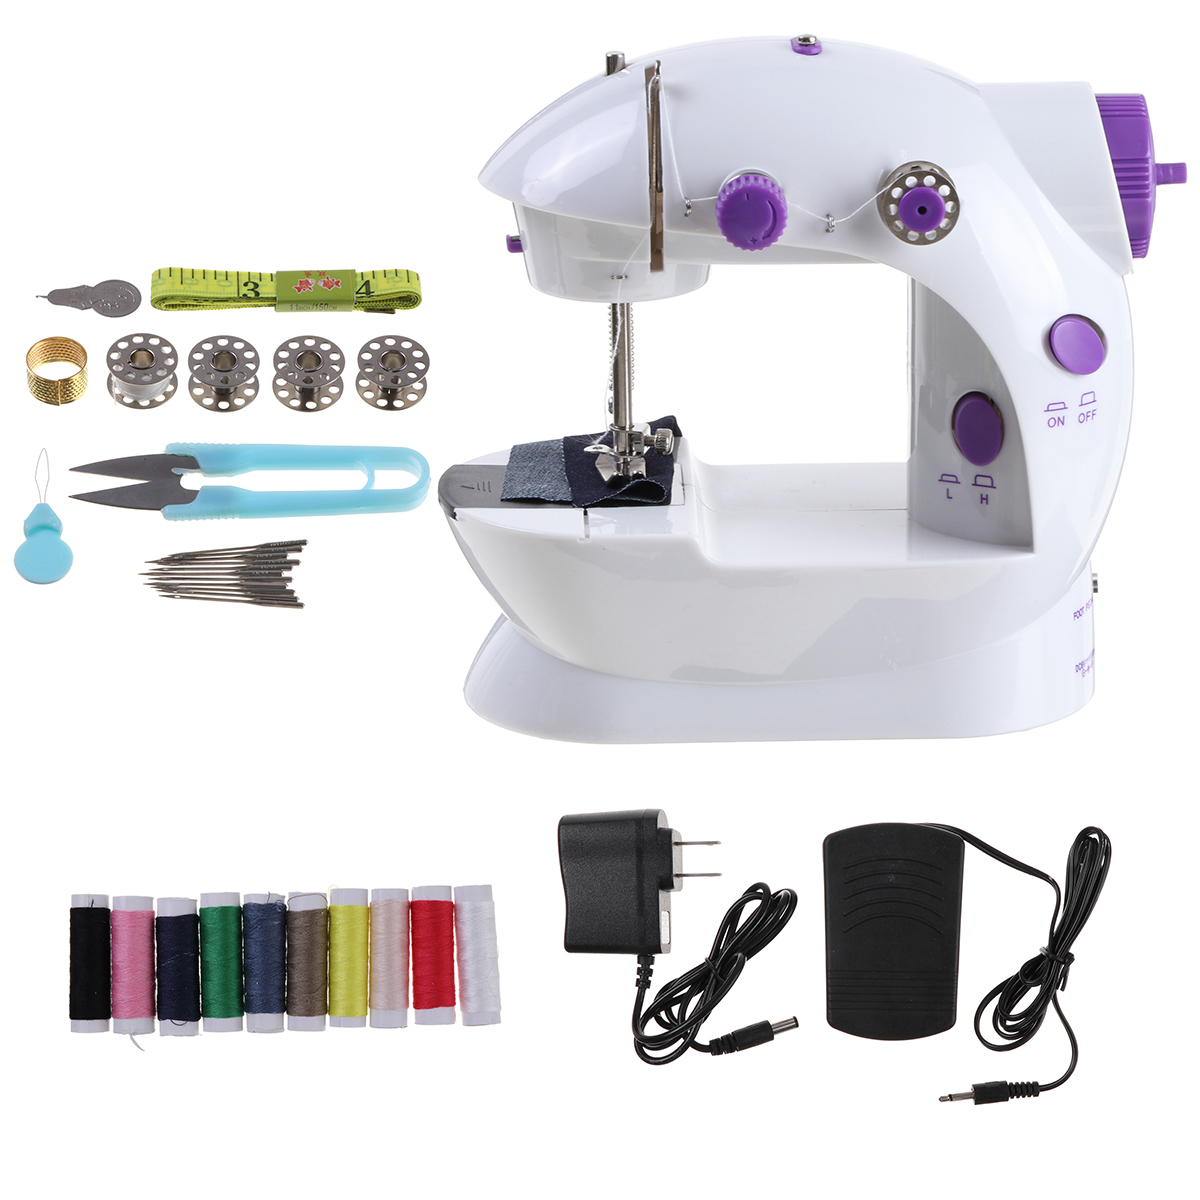 Rechargeable-Portable-Electric-Sewing-Machine-Multi-function-Household-Sewing-Machine-1753879-5